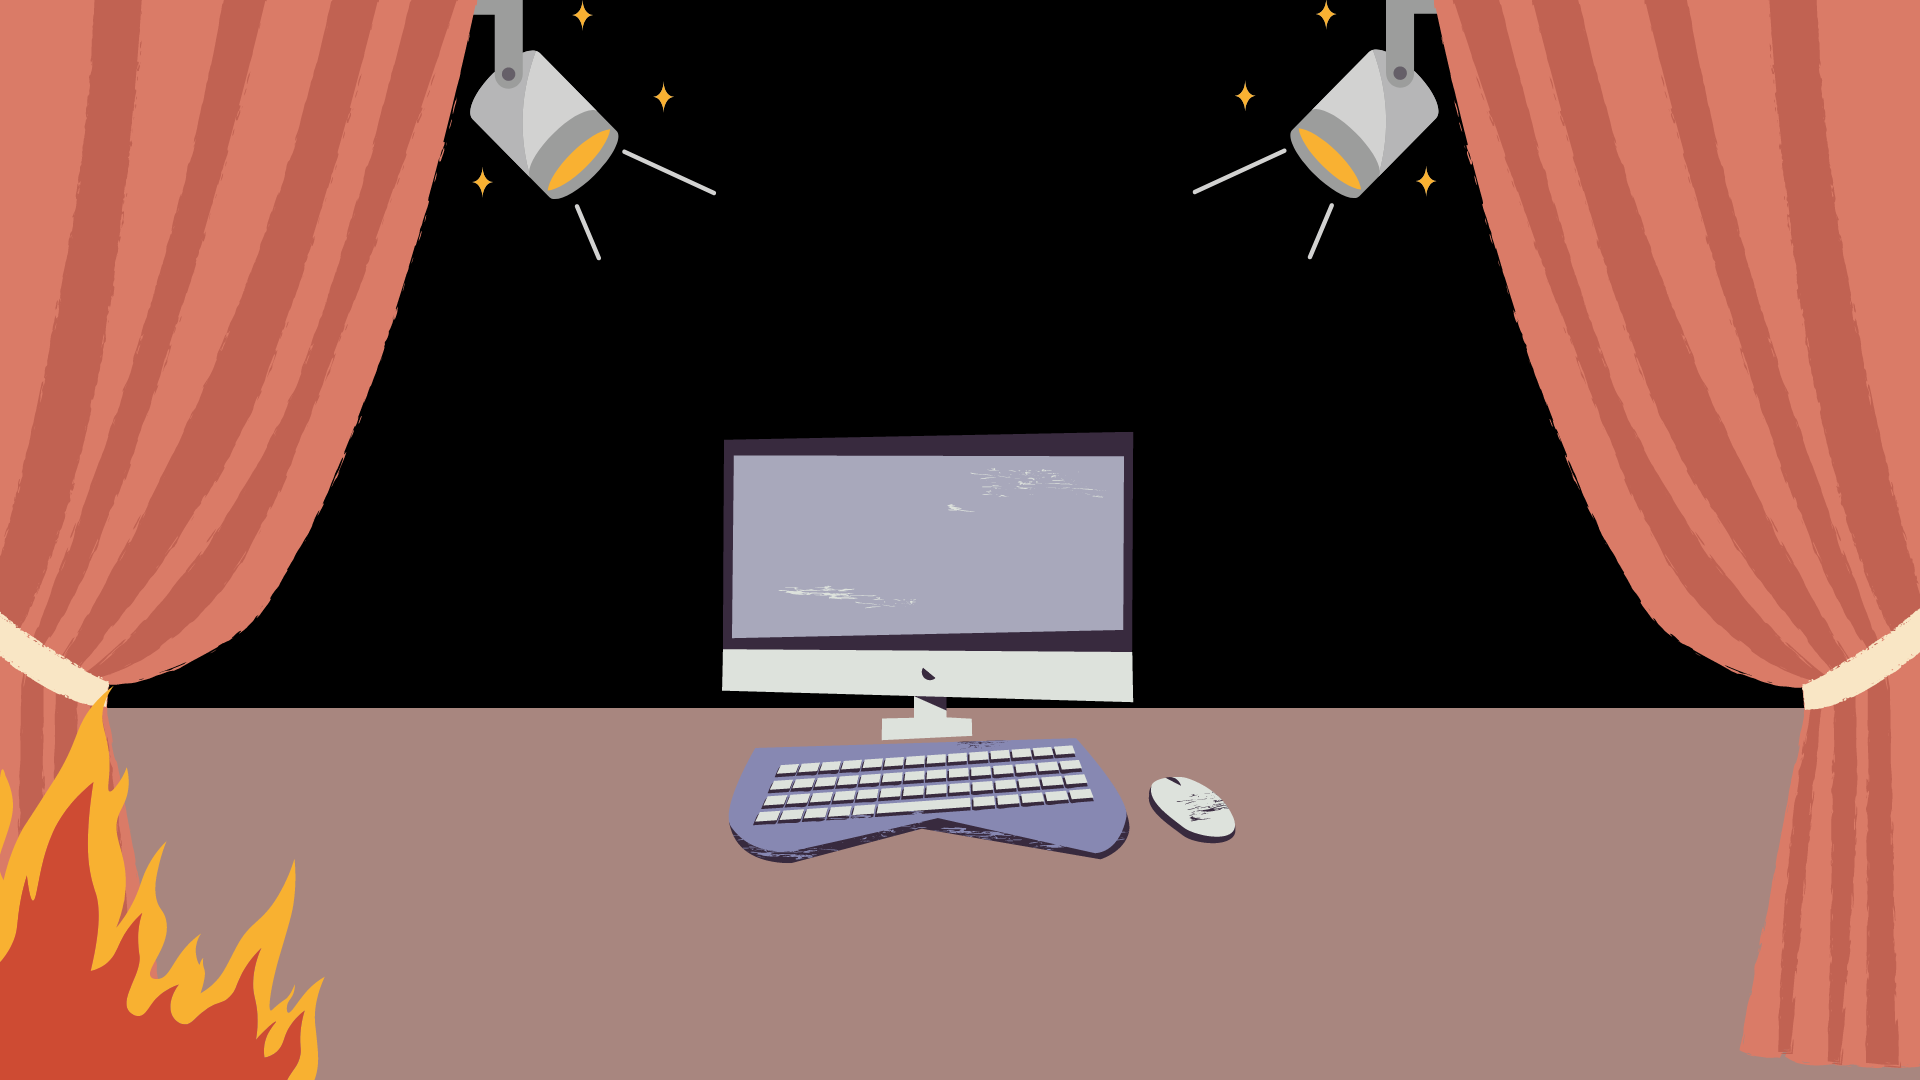 Illustration of a computer center stage with velvet curtains on fire around it